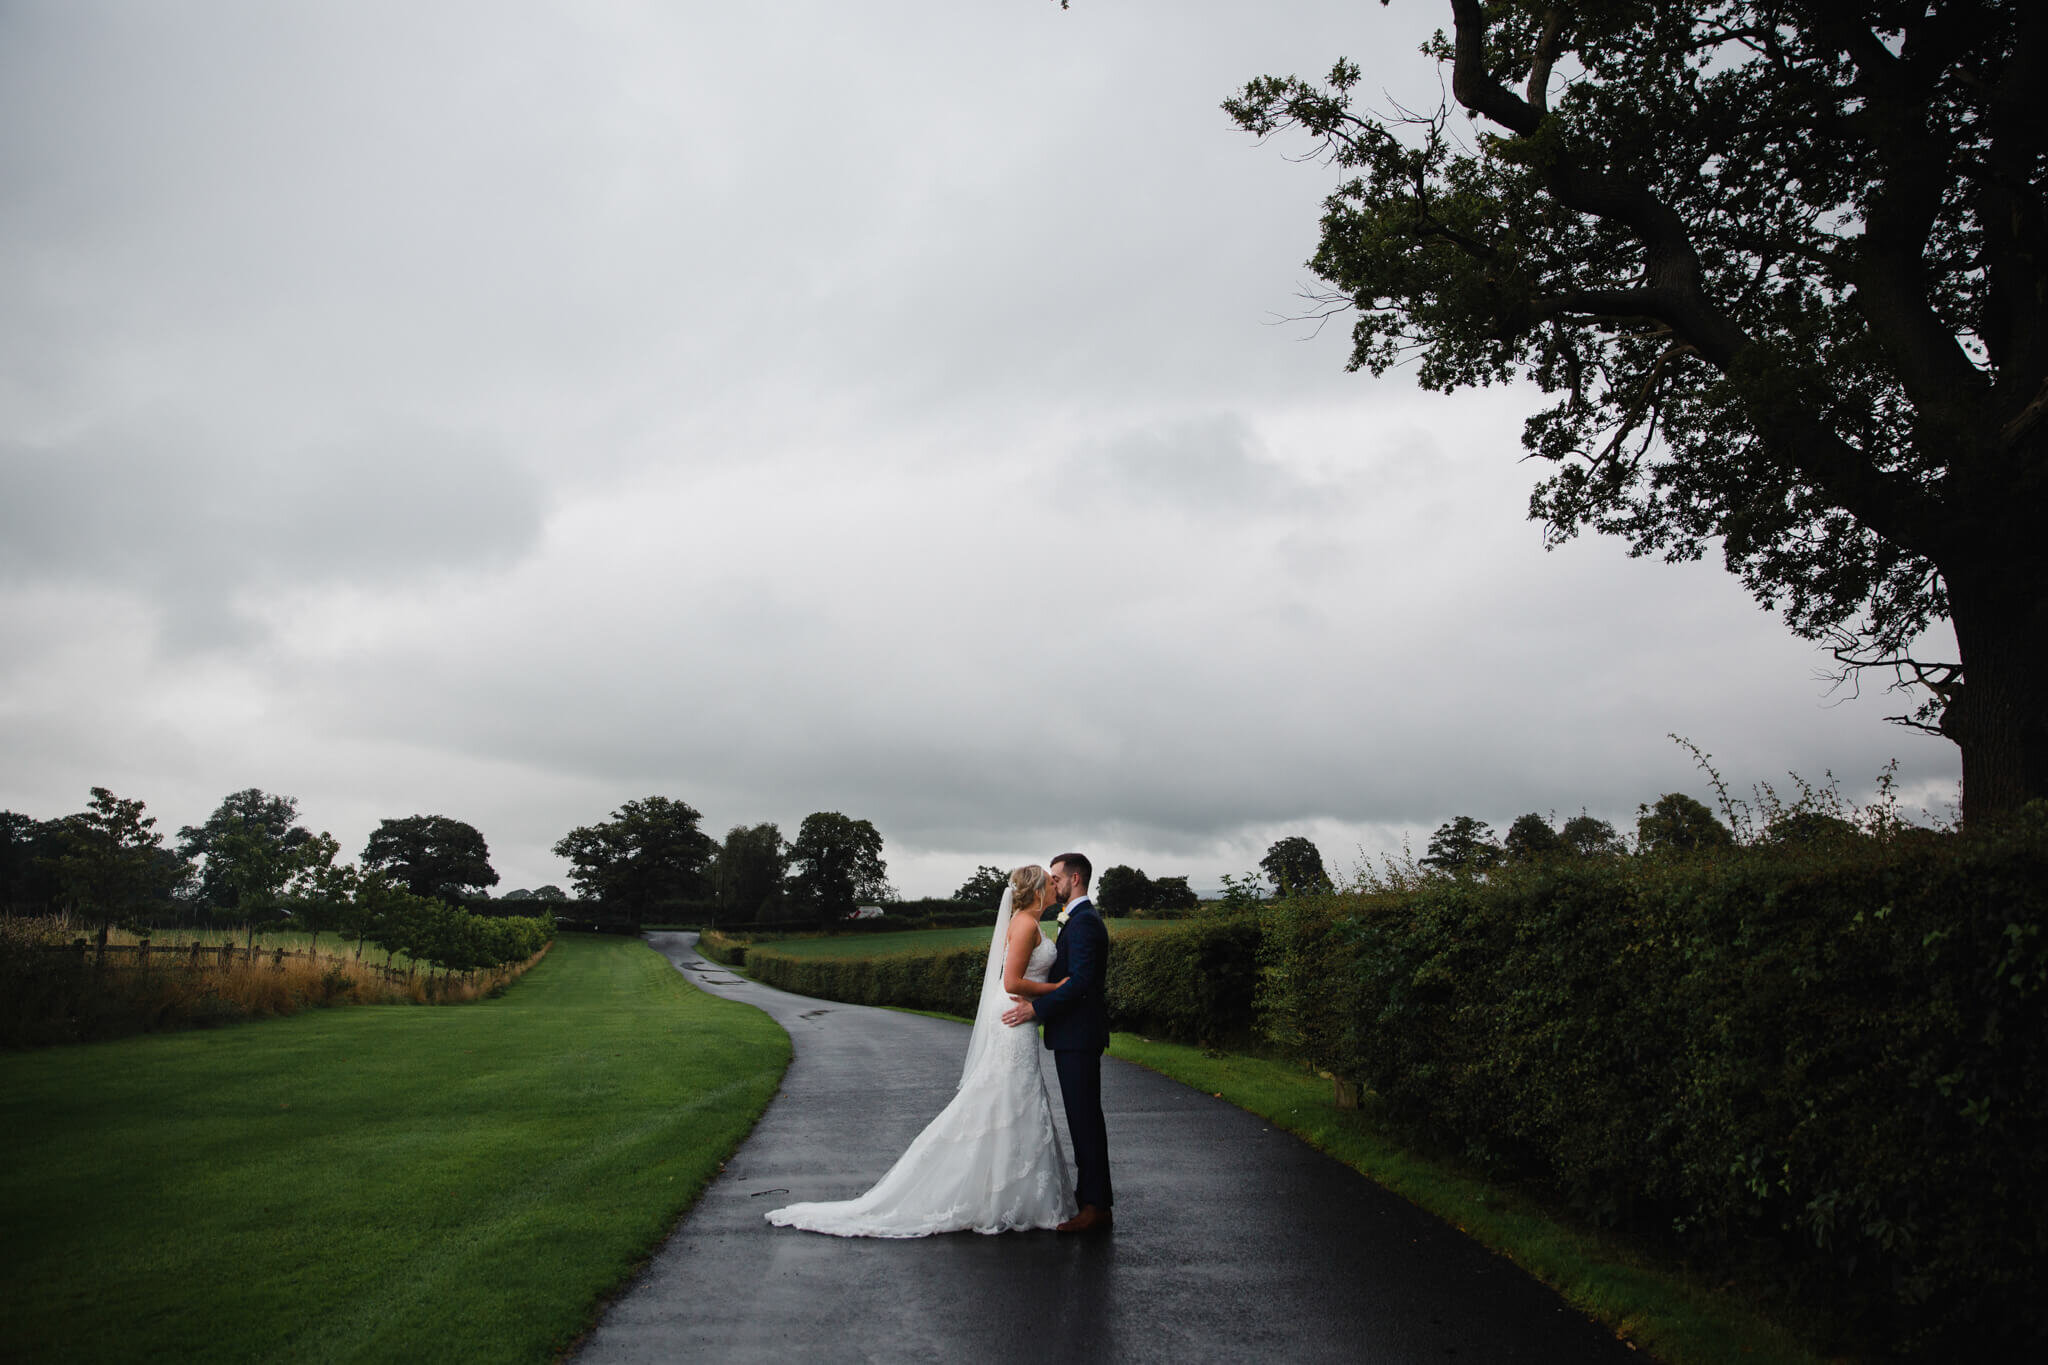 wide angle lens photograph of newlyweds on road location